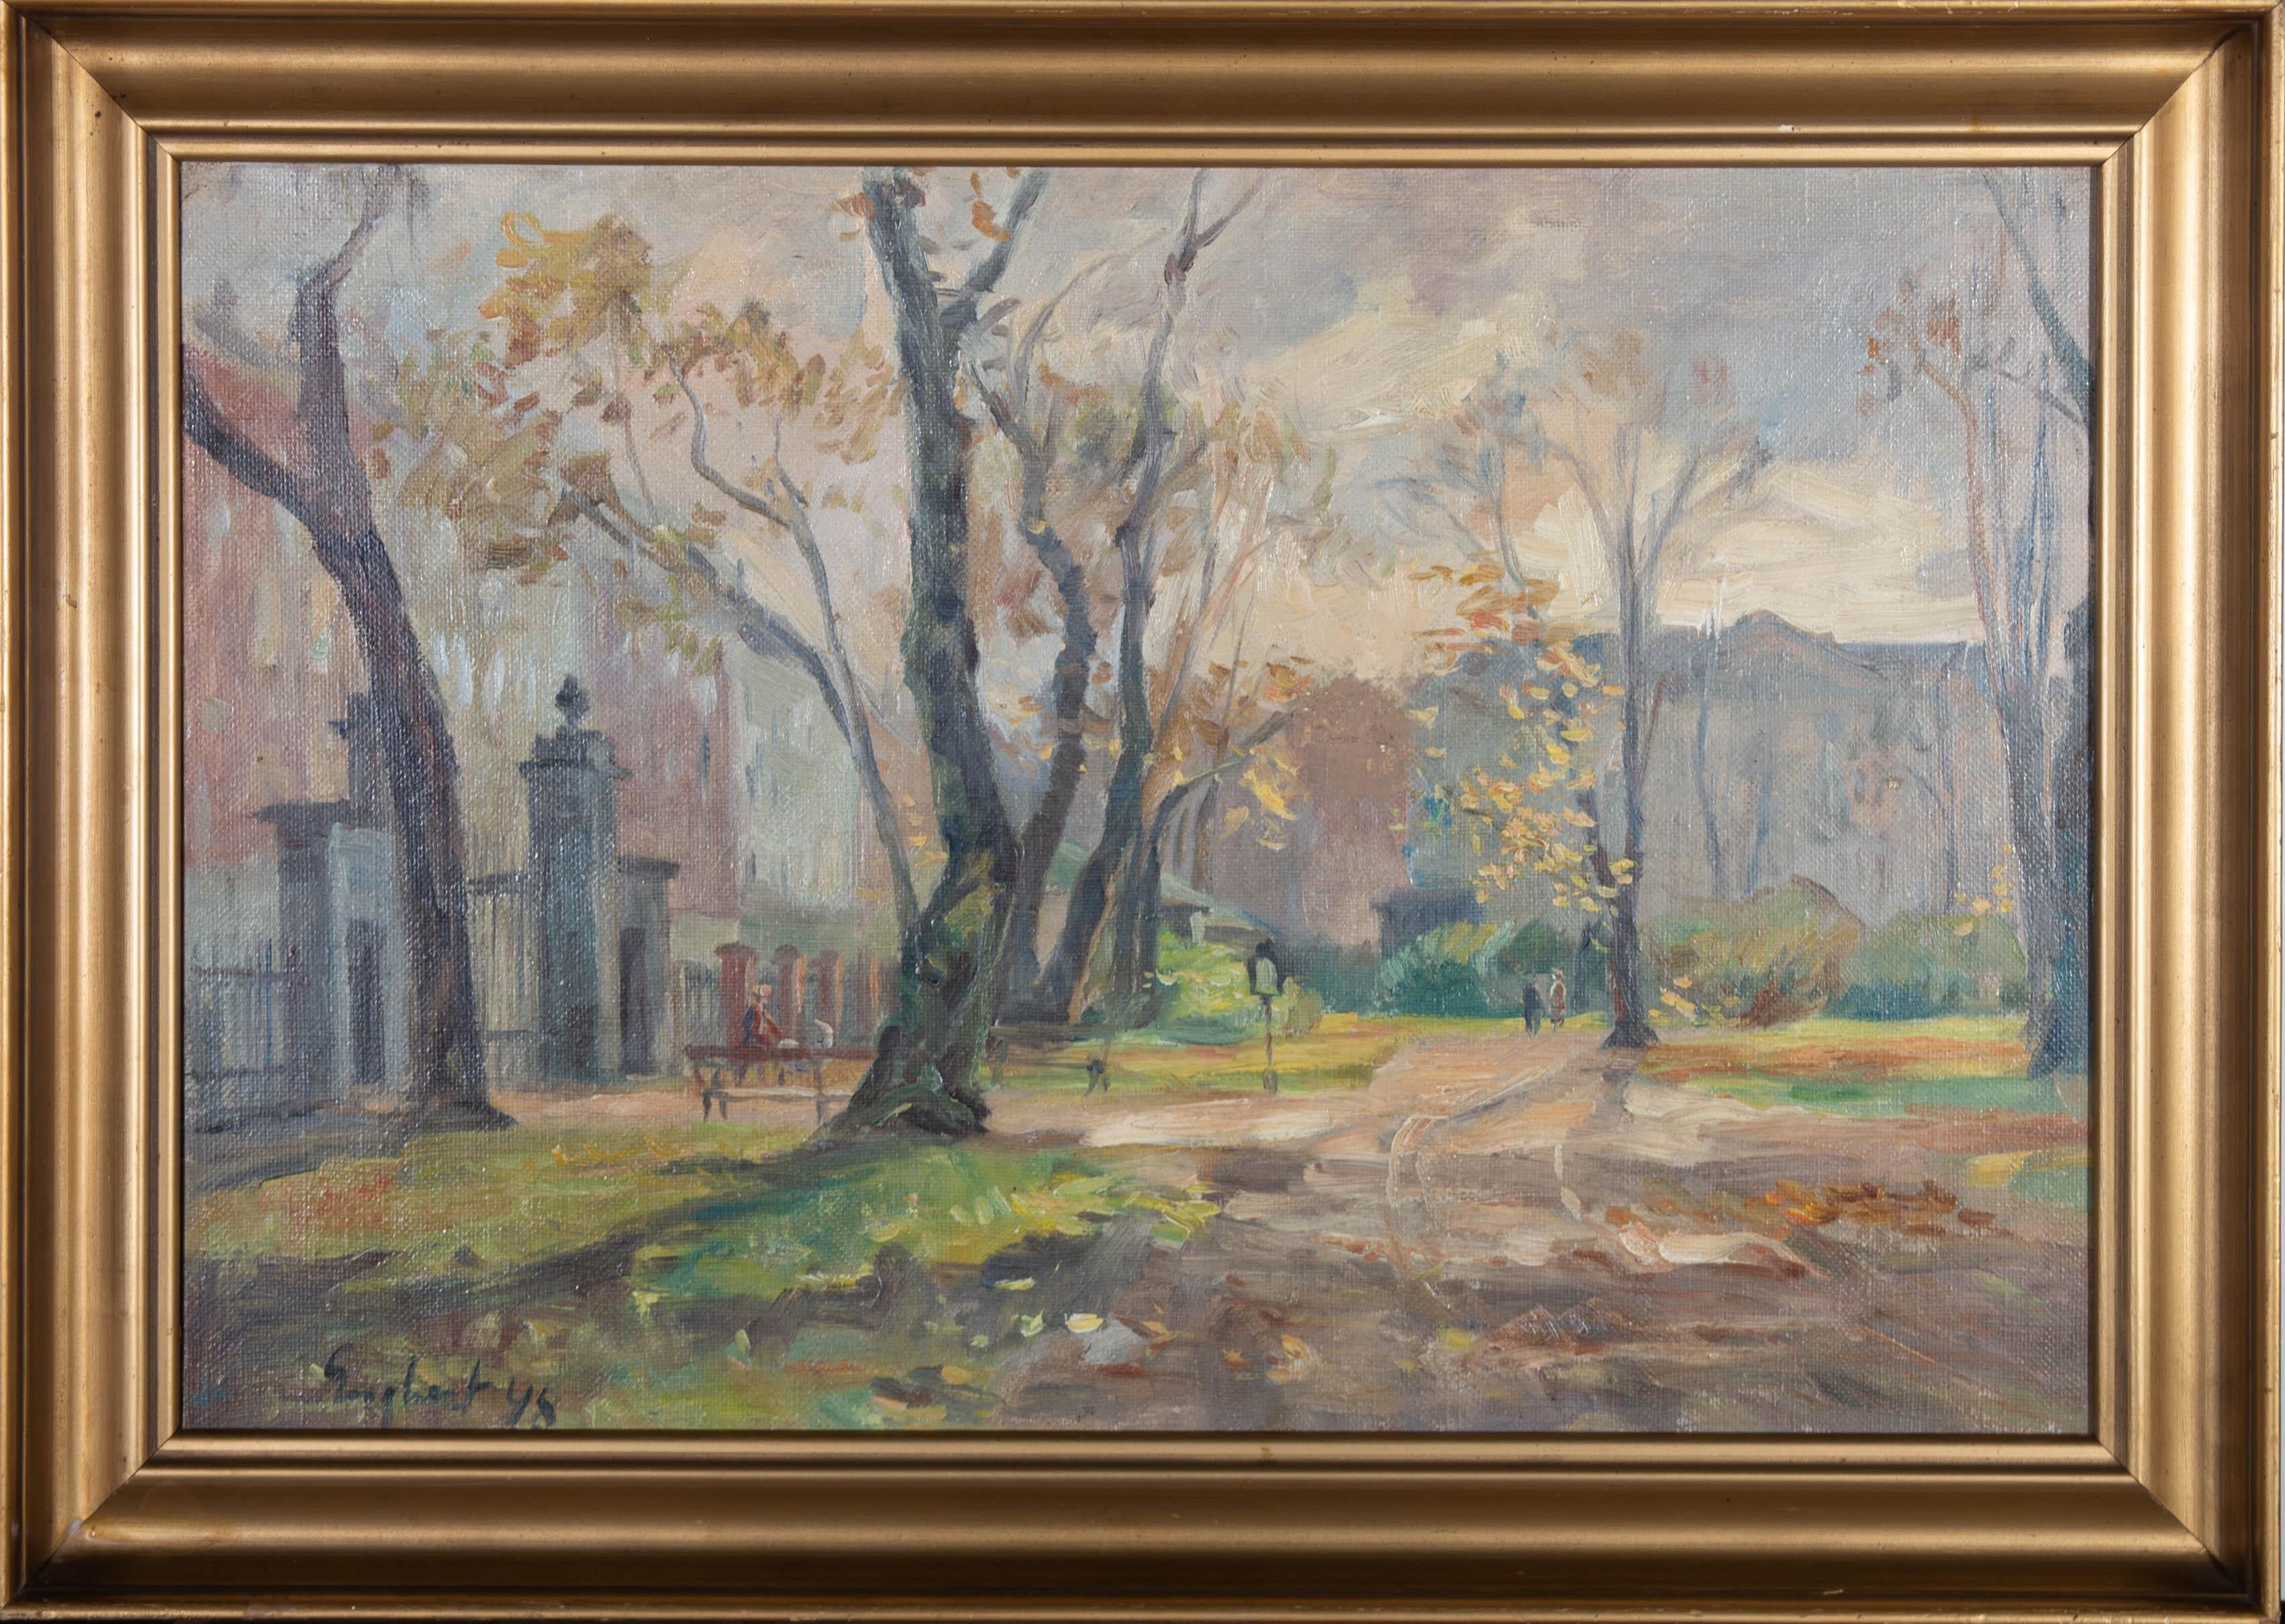 This charming scene incorporates a muted colour palette and impressionist style to depict figures strolling through a gated park. The soft pinks and greens create a tranquil atmosphere, perfectly capturing the feeling of an a quiet park on a winter